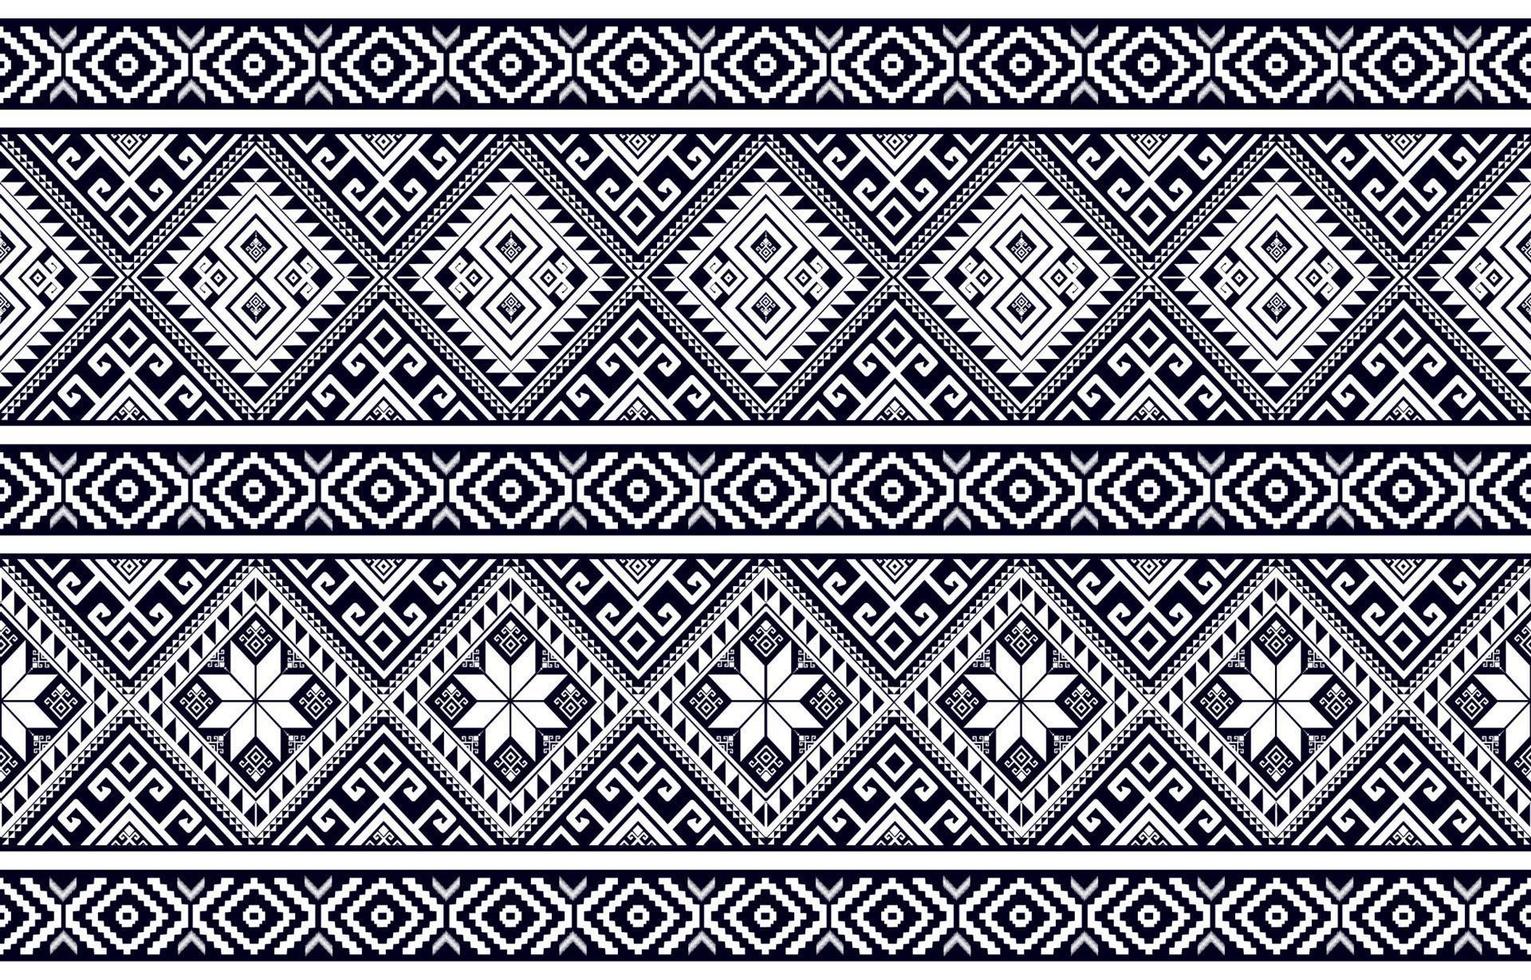 Black and white abstract geometric ethnic pattern western, american indian onrental africa. for carpet,wallpaper,clothing,wrapping,batik,fabric,tile, backdrop,Vector illustration. embroidery style. vector